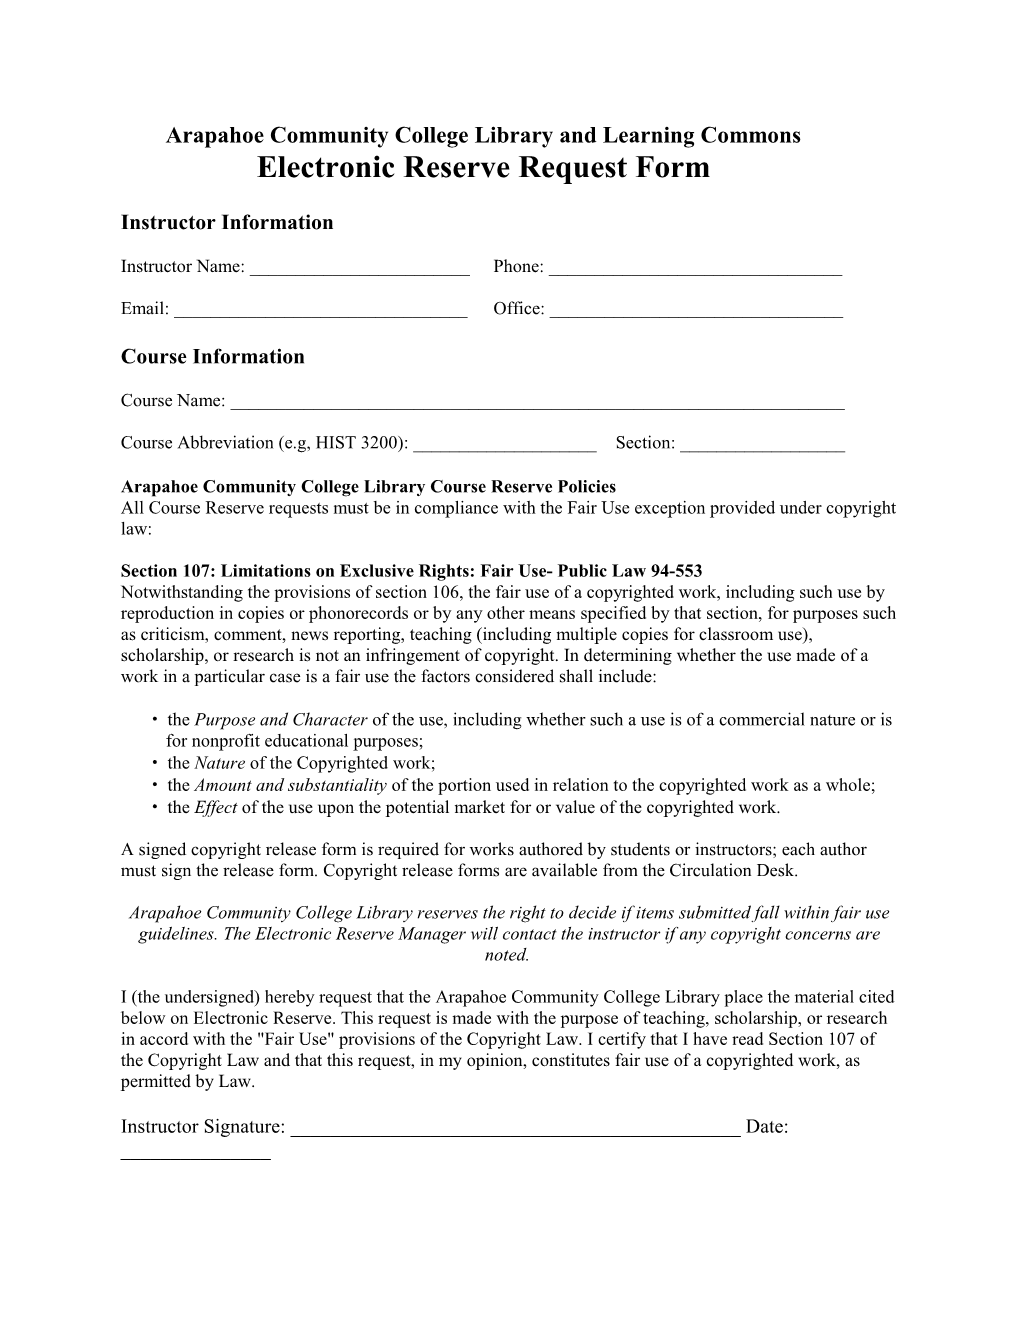 Arapahoe Community College Library and Learning Commons Electronic Reserve Request Form